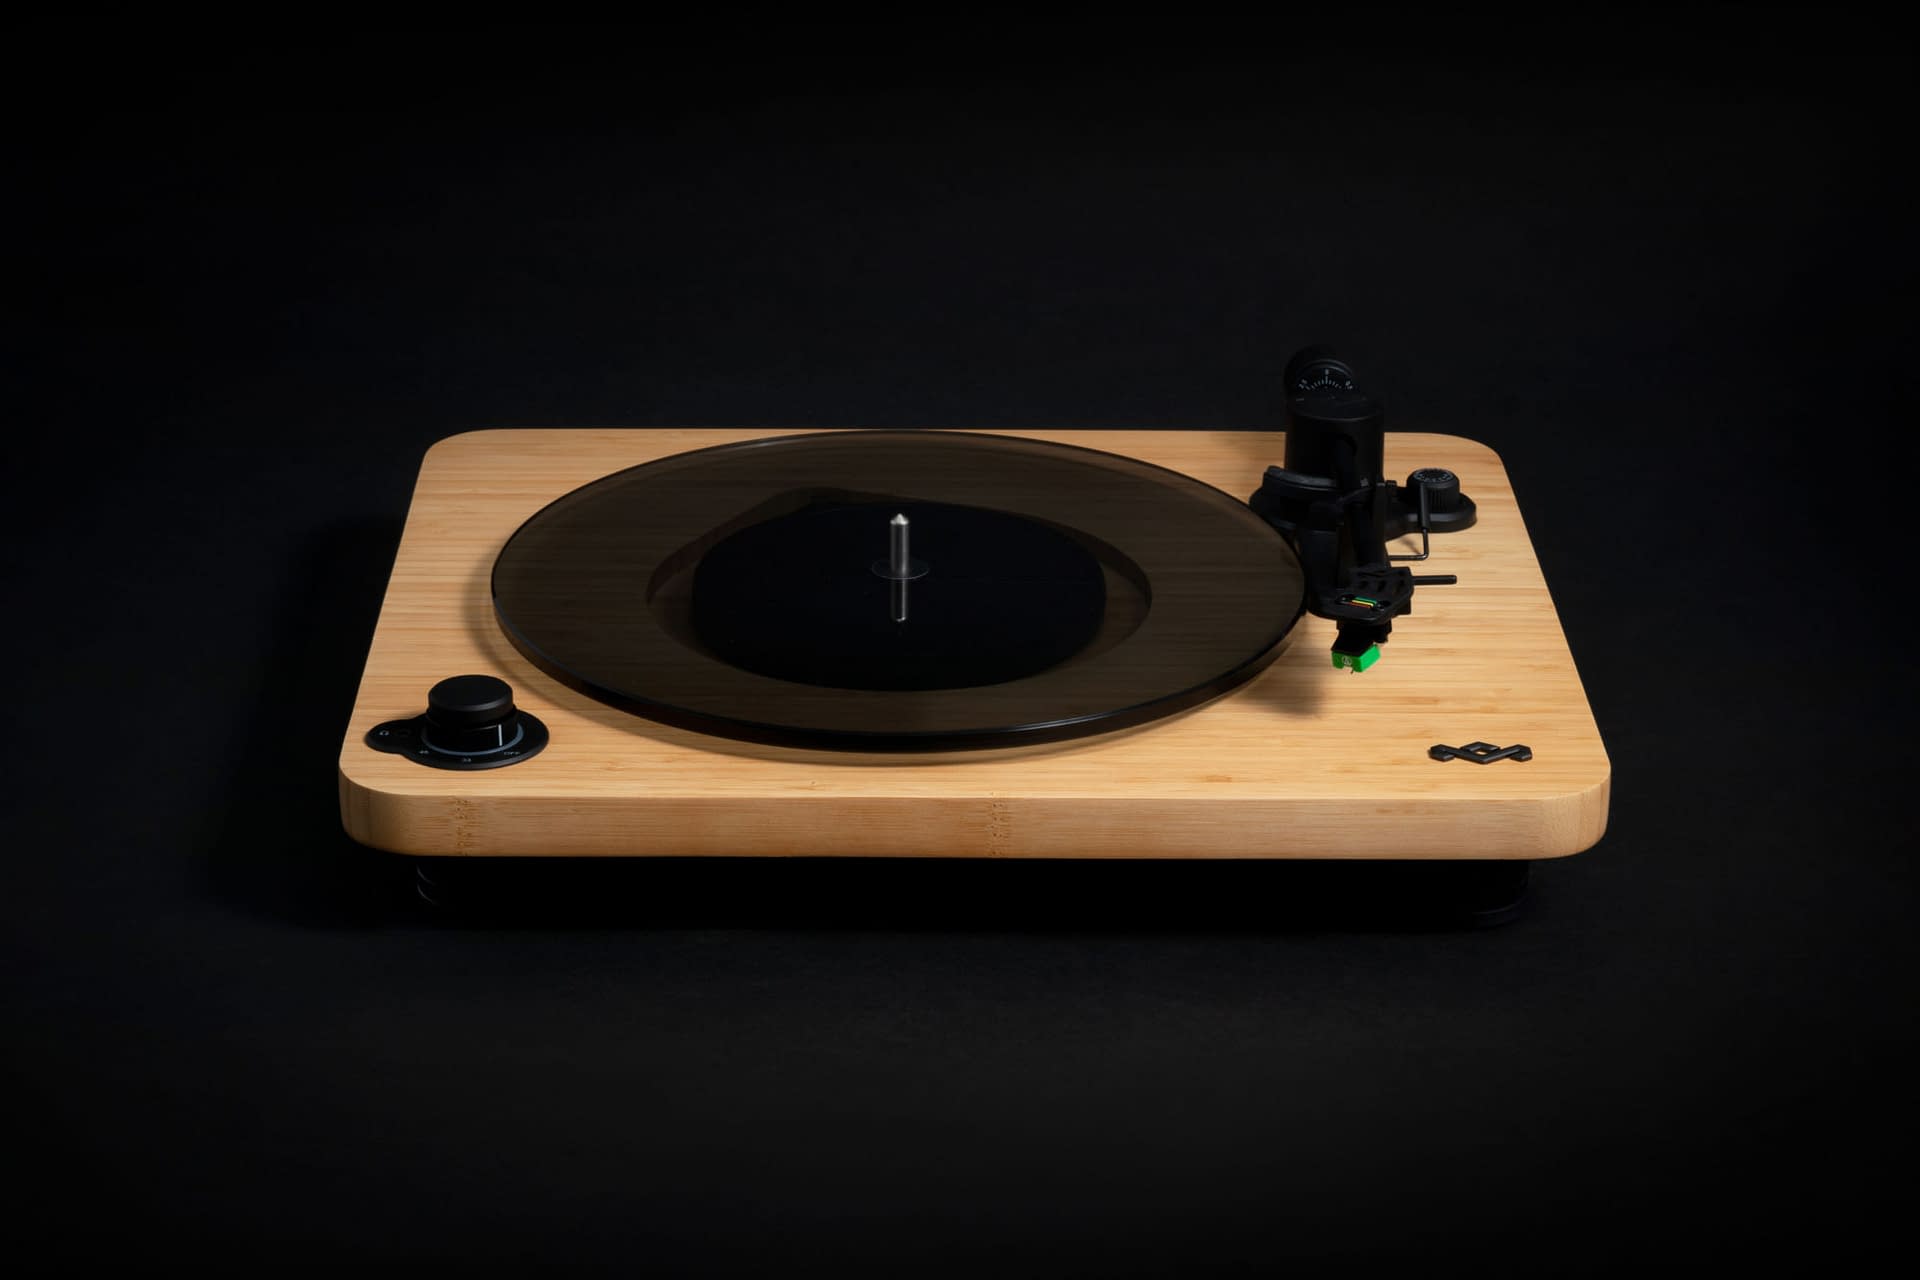 House Of Marley “satisfy the soul” with the new Stir It Up Lux